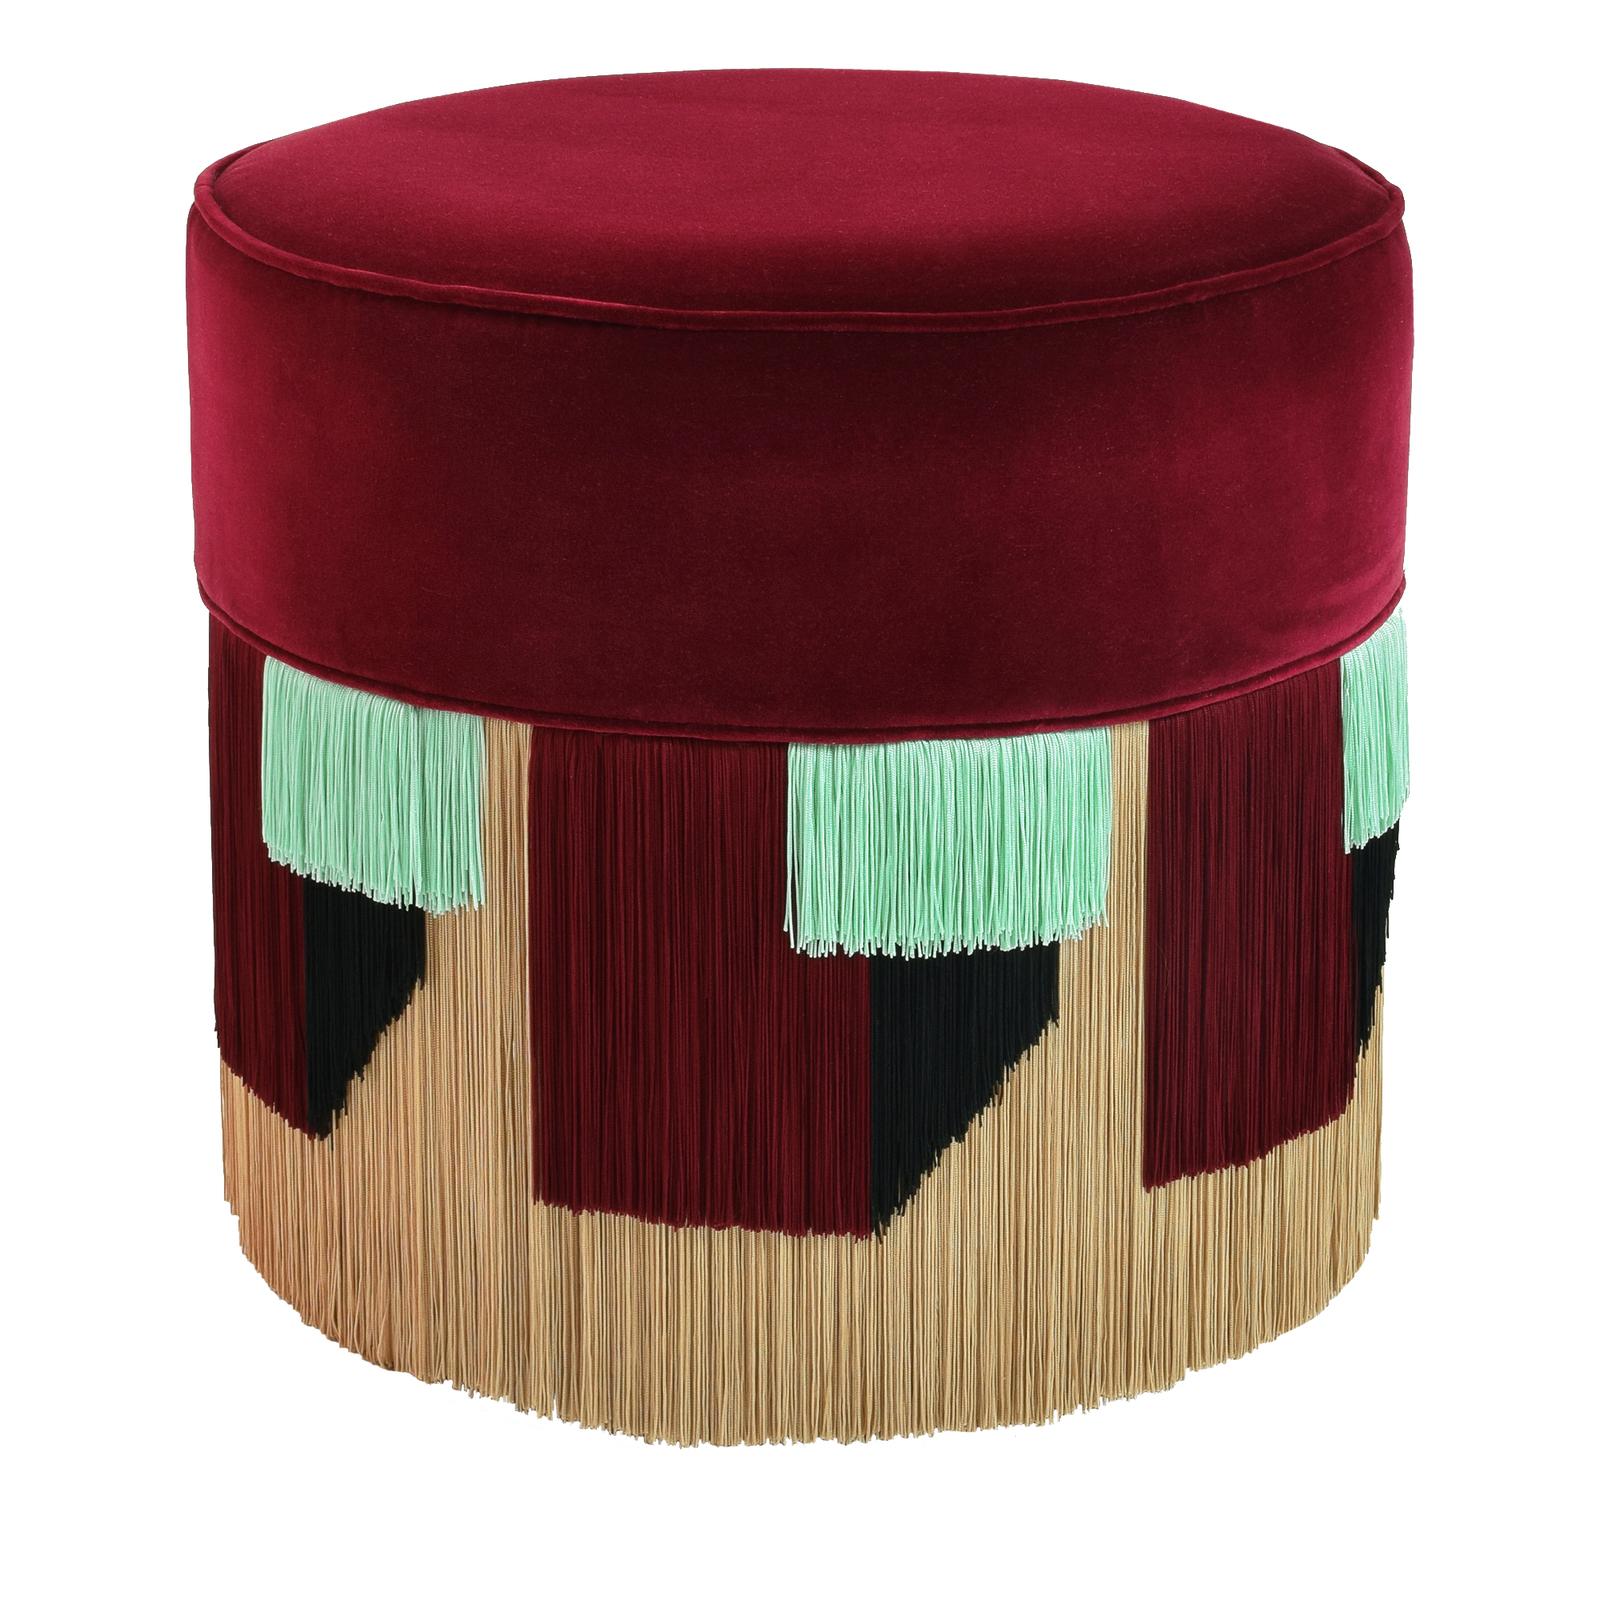 Couture Bordeaux Pouf with Geometric Fringe by Lorenza Bozzoli Design For Sale